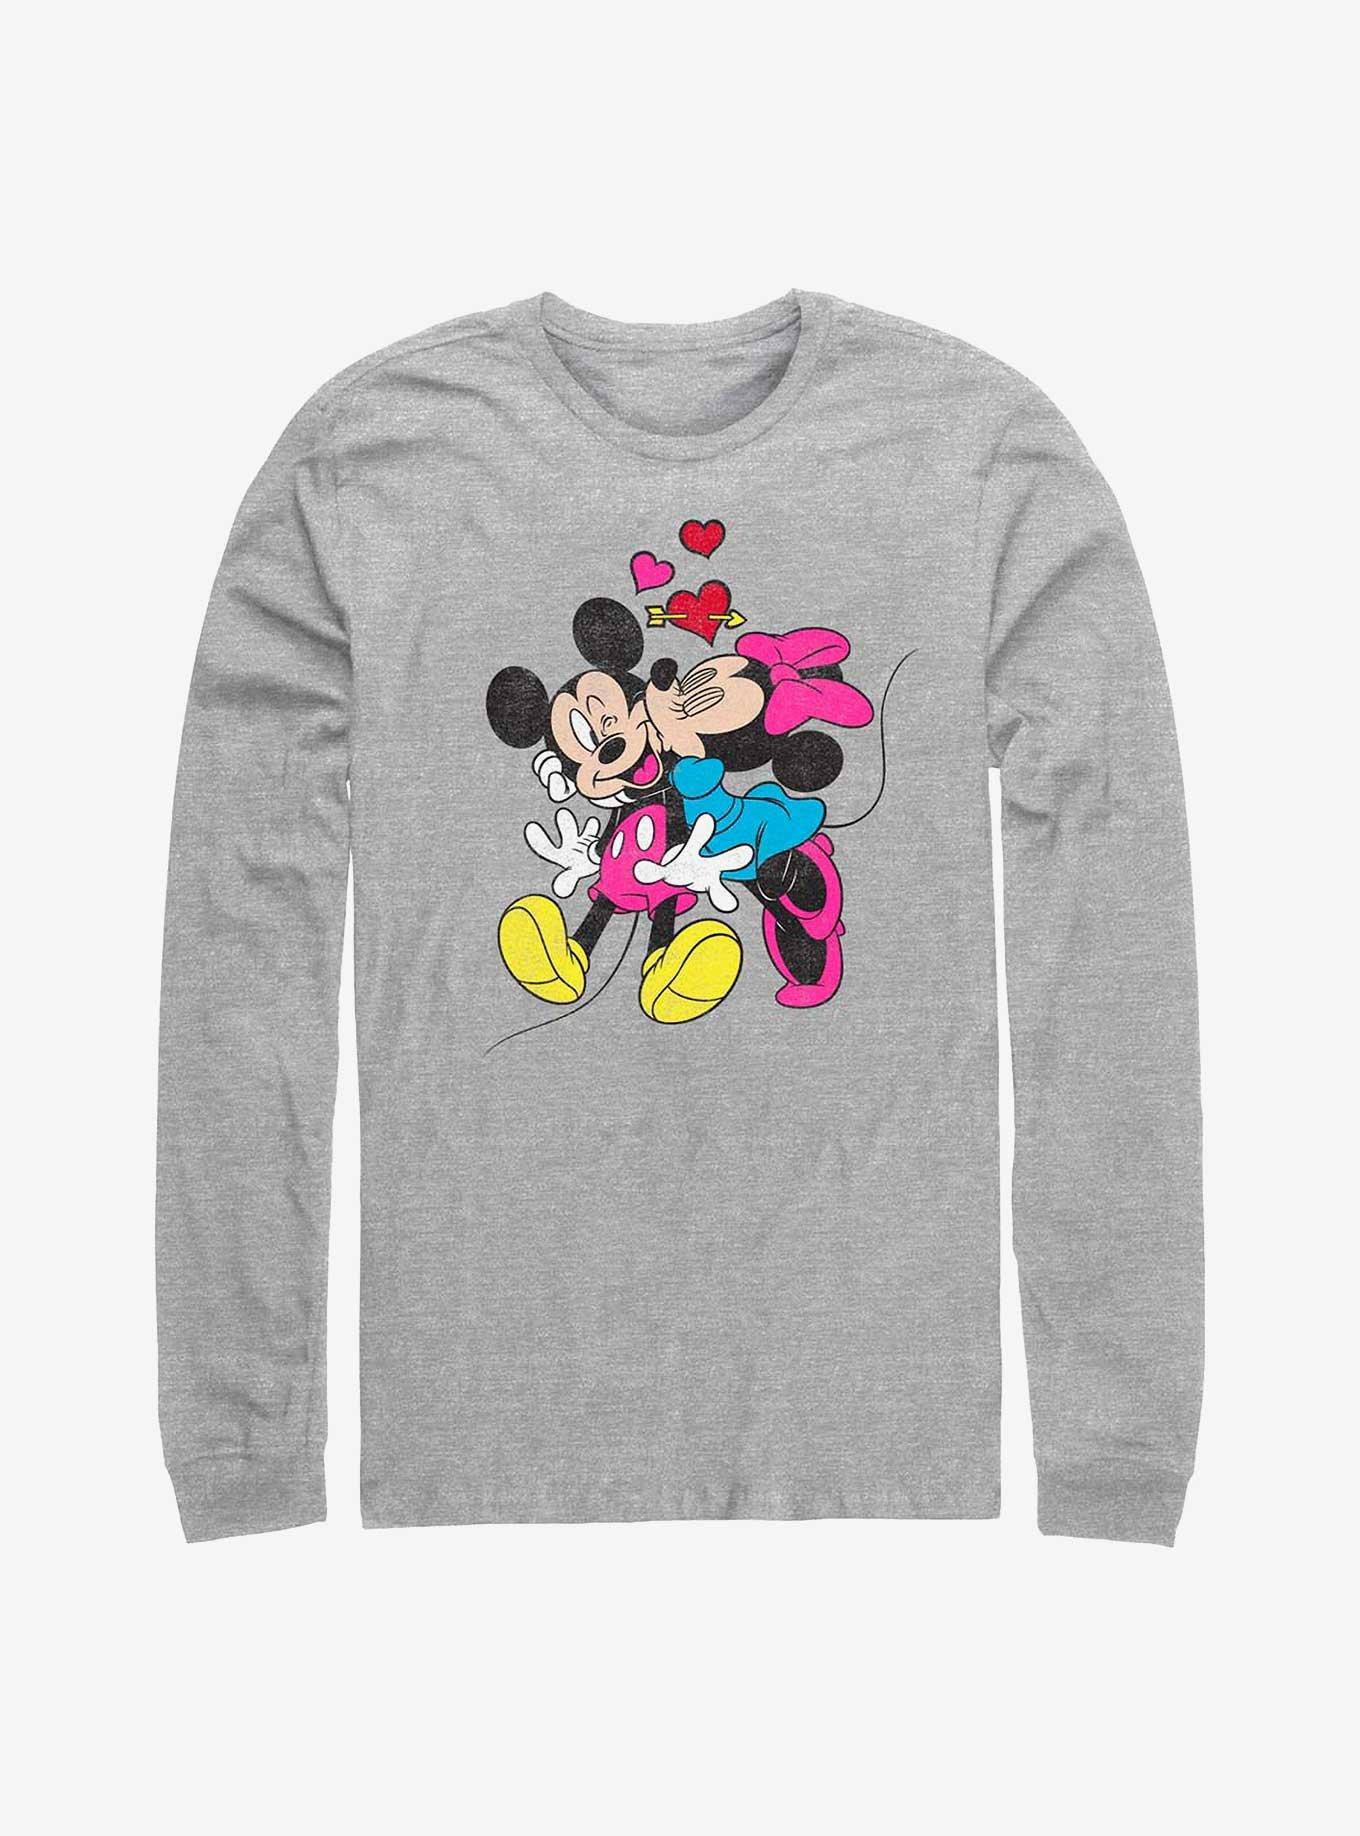 Disney Mickey Mouse & Minnie Mouse Love Long-Sleeve T-Shirt, ATH HTR, hi-res